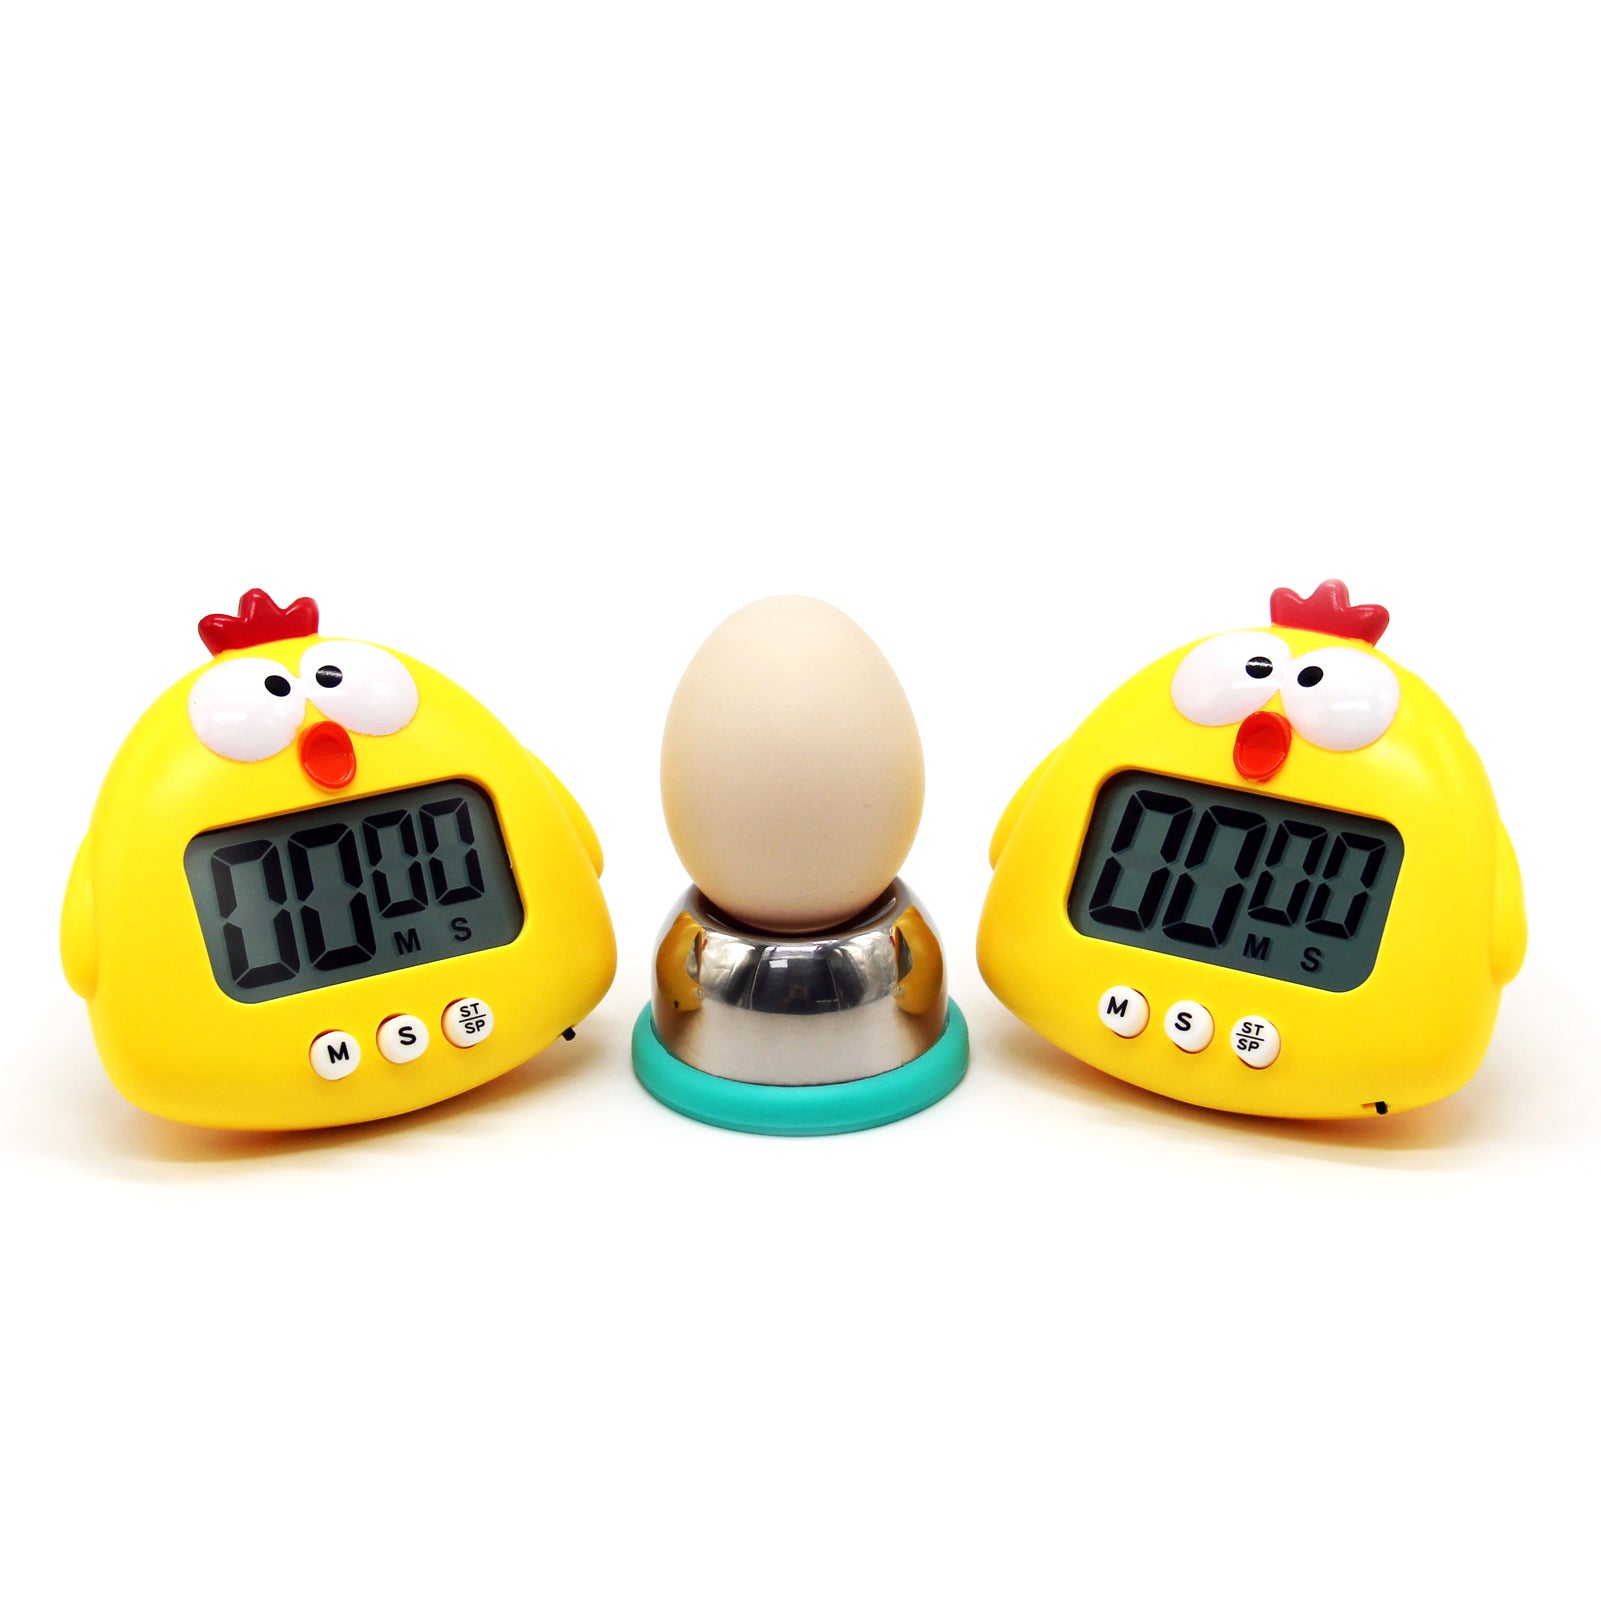 JAMOR 2 Pieces of Chicken Timer Set, Big Digital Loud Alarm, Magnetic Support Rack Cooking Timer,Multi-Function Electronic Timer,Suitable For Kitchen,Study,Work, Sports Training,Outdoor Activities